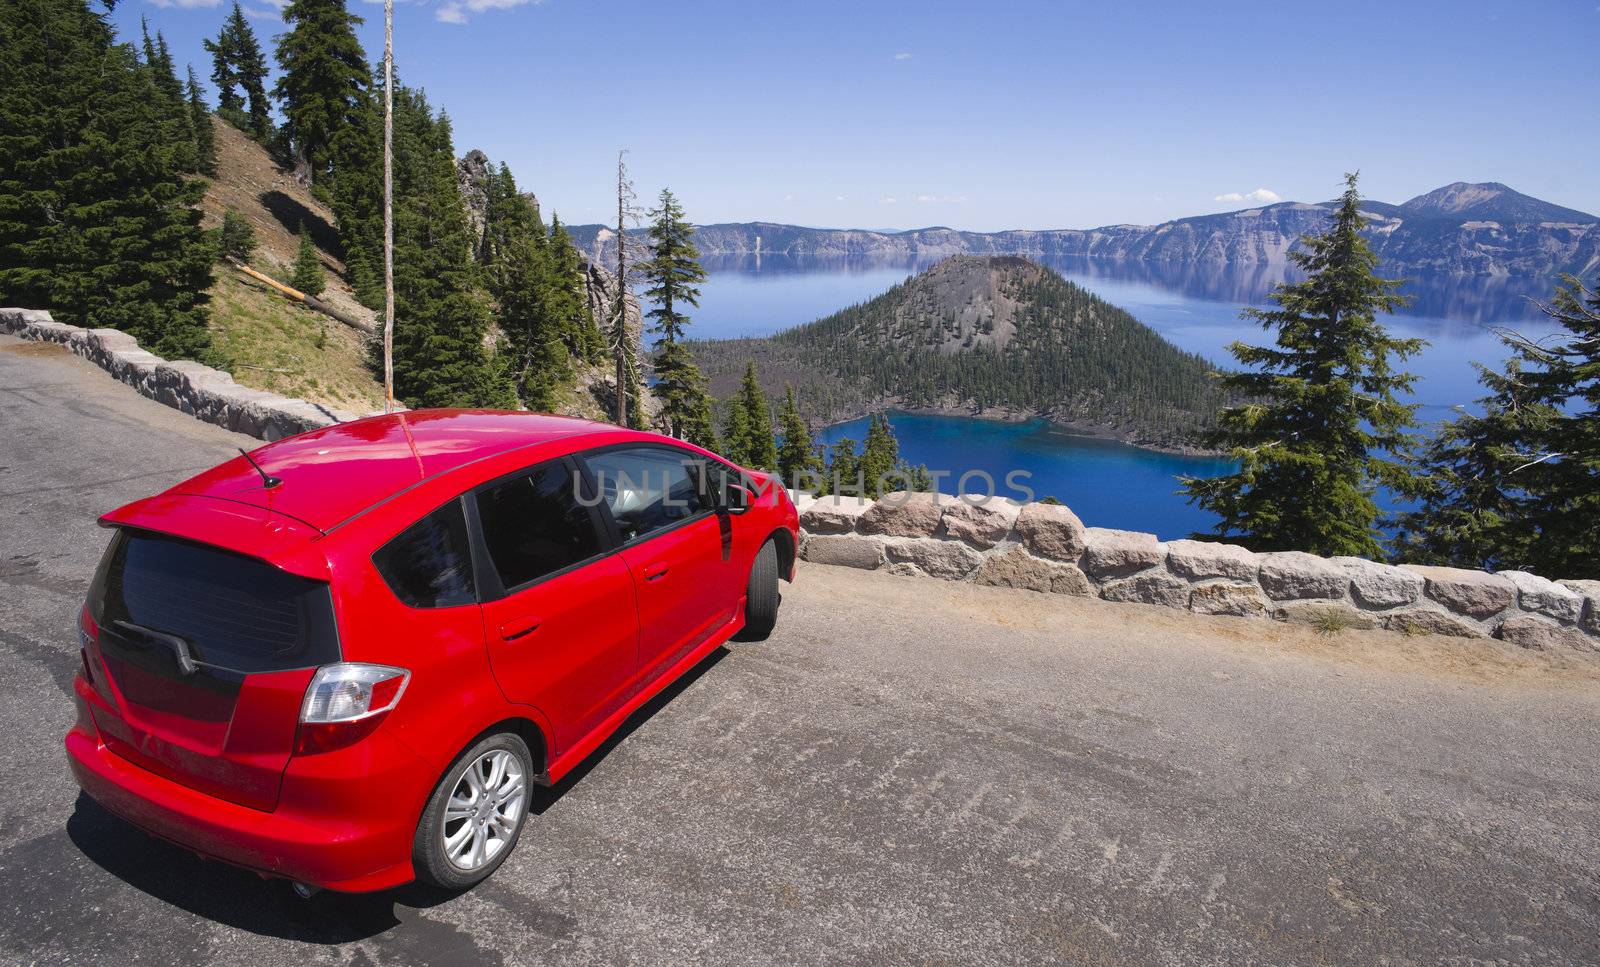 A Car is stopped at Crater Lake Oregon in the United States